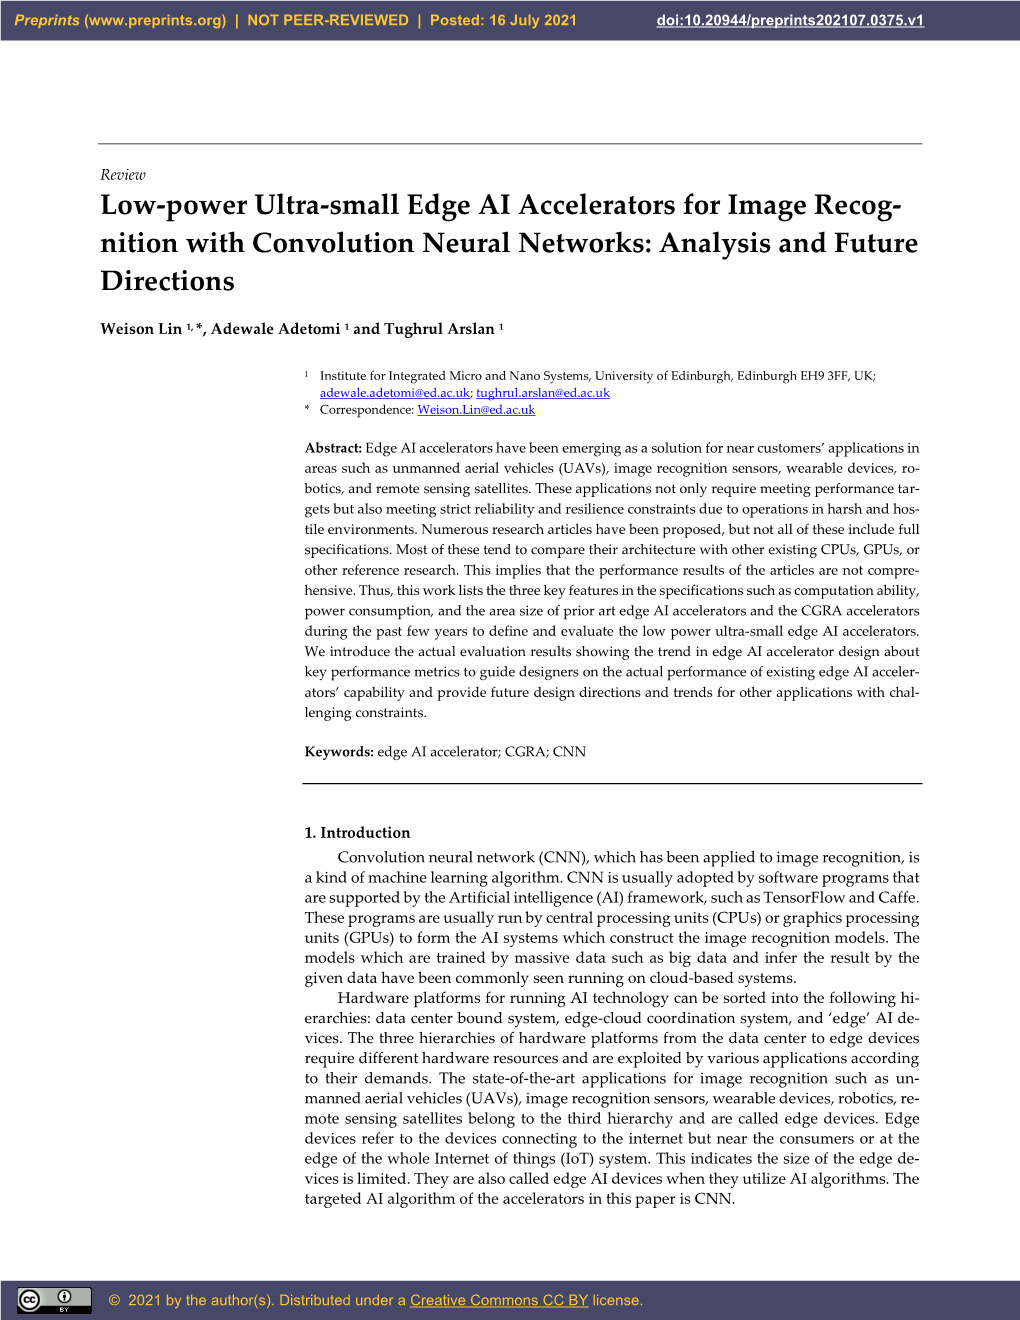 Low-Power Ultra-Small Edge AI Accelerators for Image Recog- Nition with Convolution Neural Networks: Analysis and Future Directions